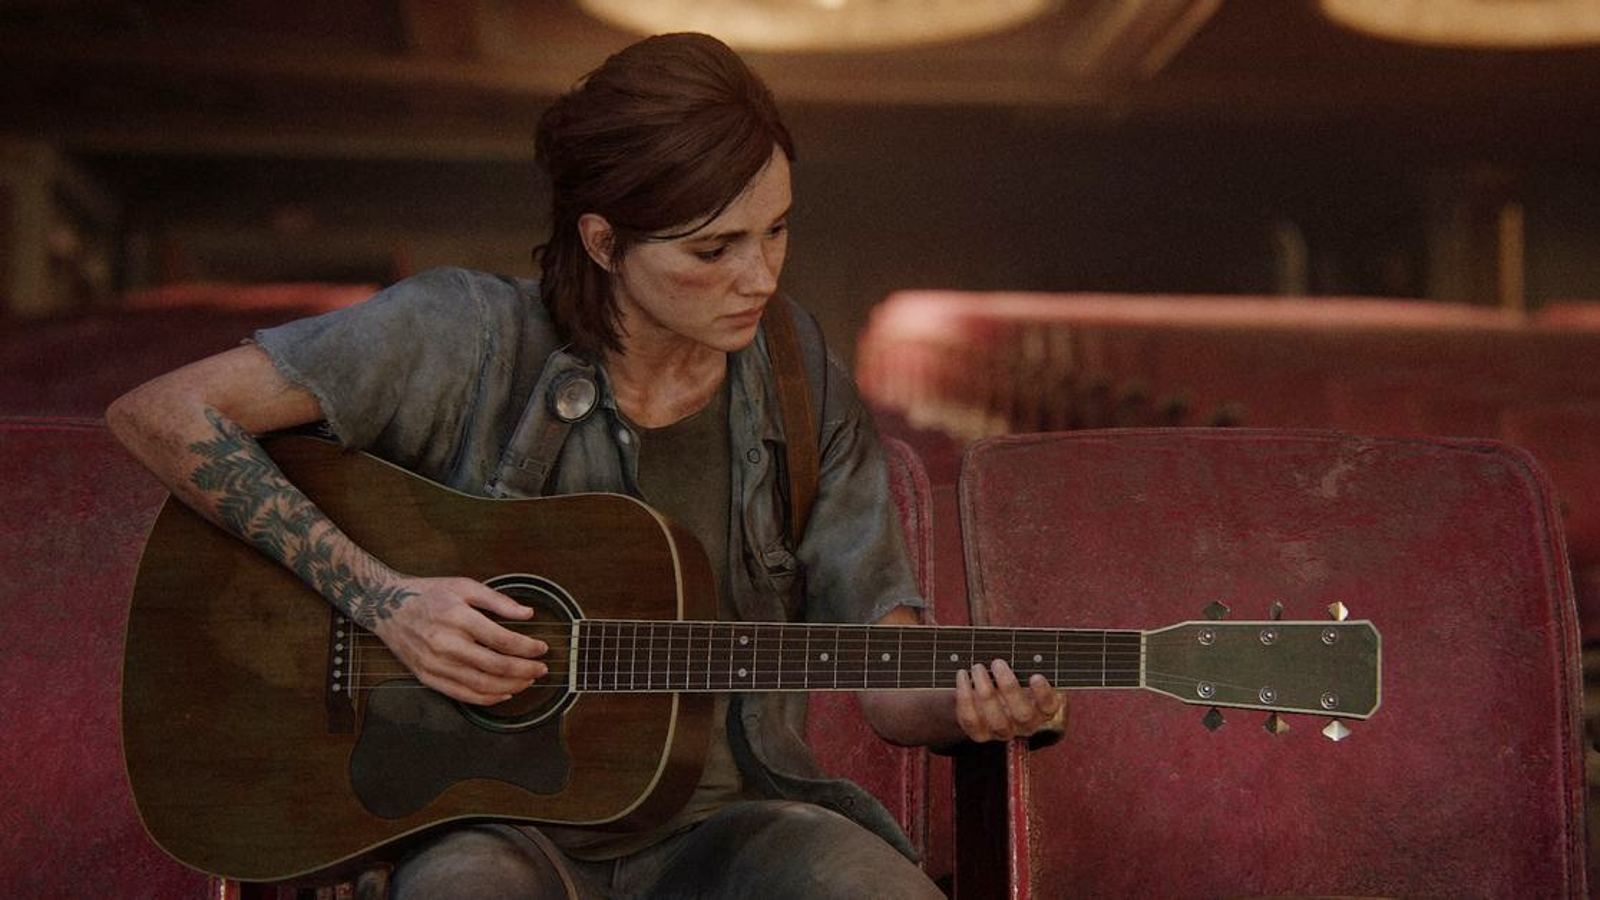 The Last of Us Part II': The importance of Ellie's coming out